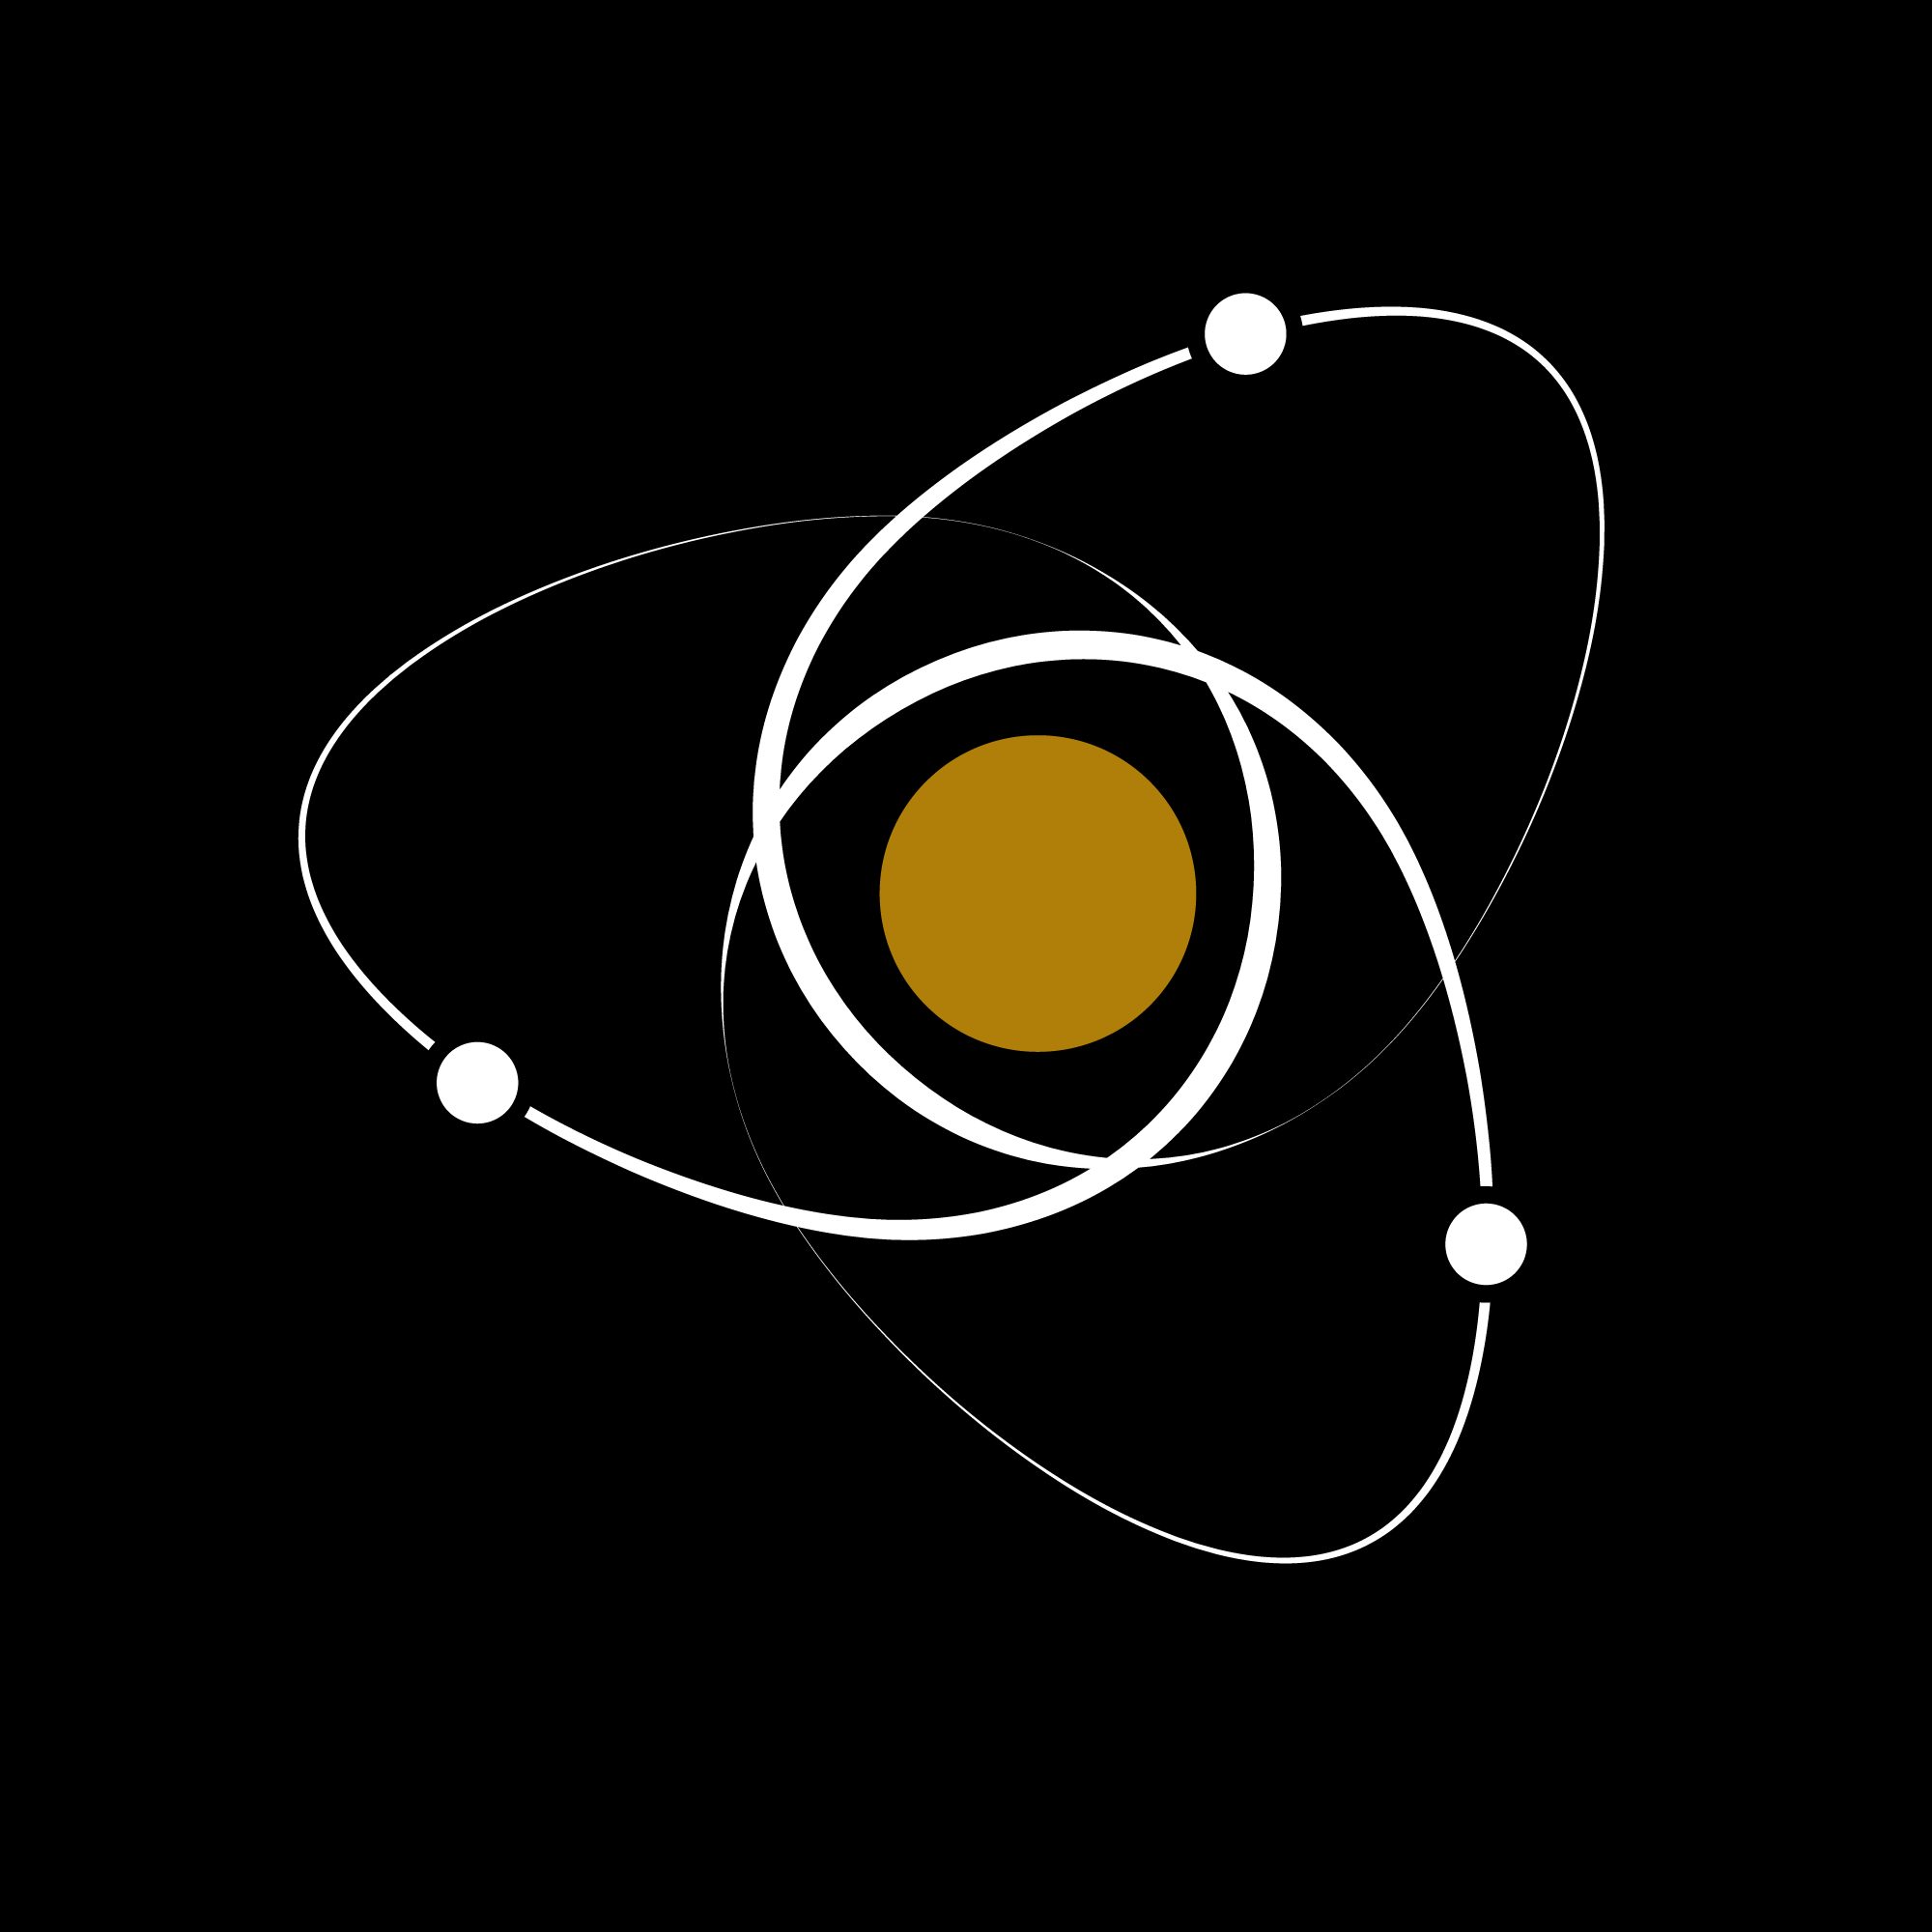 The Structure Of The Egg Atom